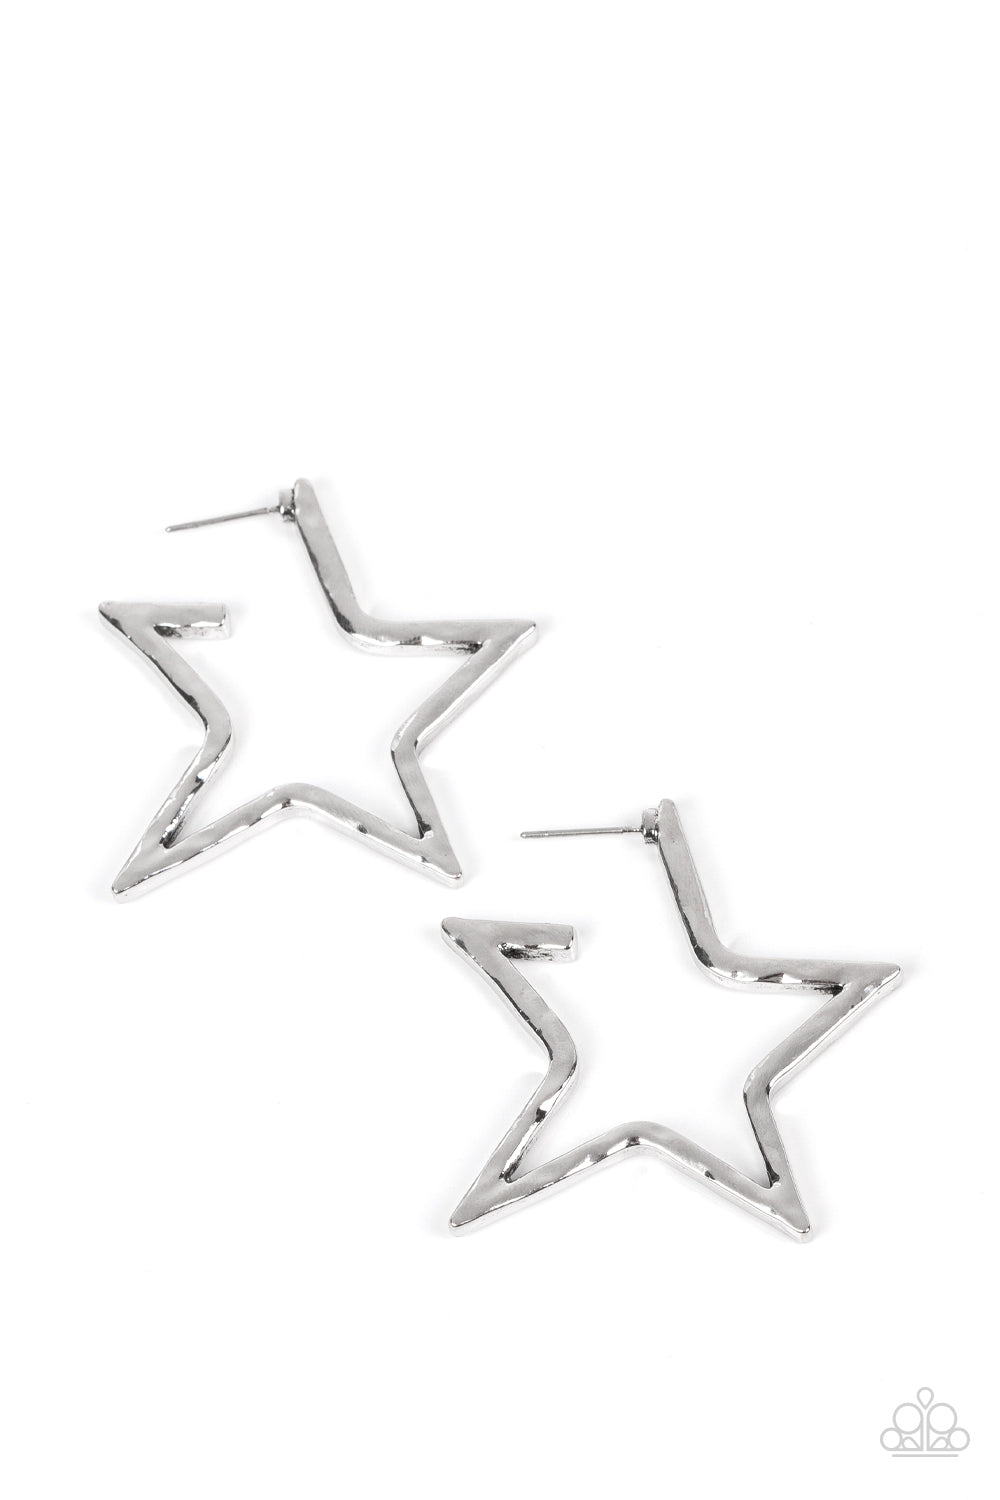 All-Star Attitude Silver Hoop Earring - Paparazzi Accessories  A hammered silver bar delicately folds into a star-shaped hoop, resulting in a stellar metallic shimmer. Earring attaches to a standard post fitting.  Sold as one pair of hoop earrings.